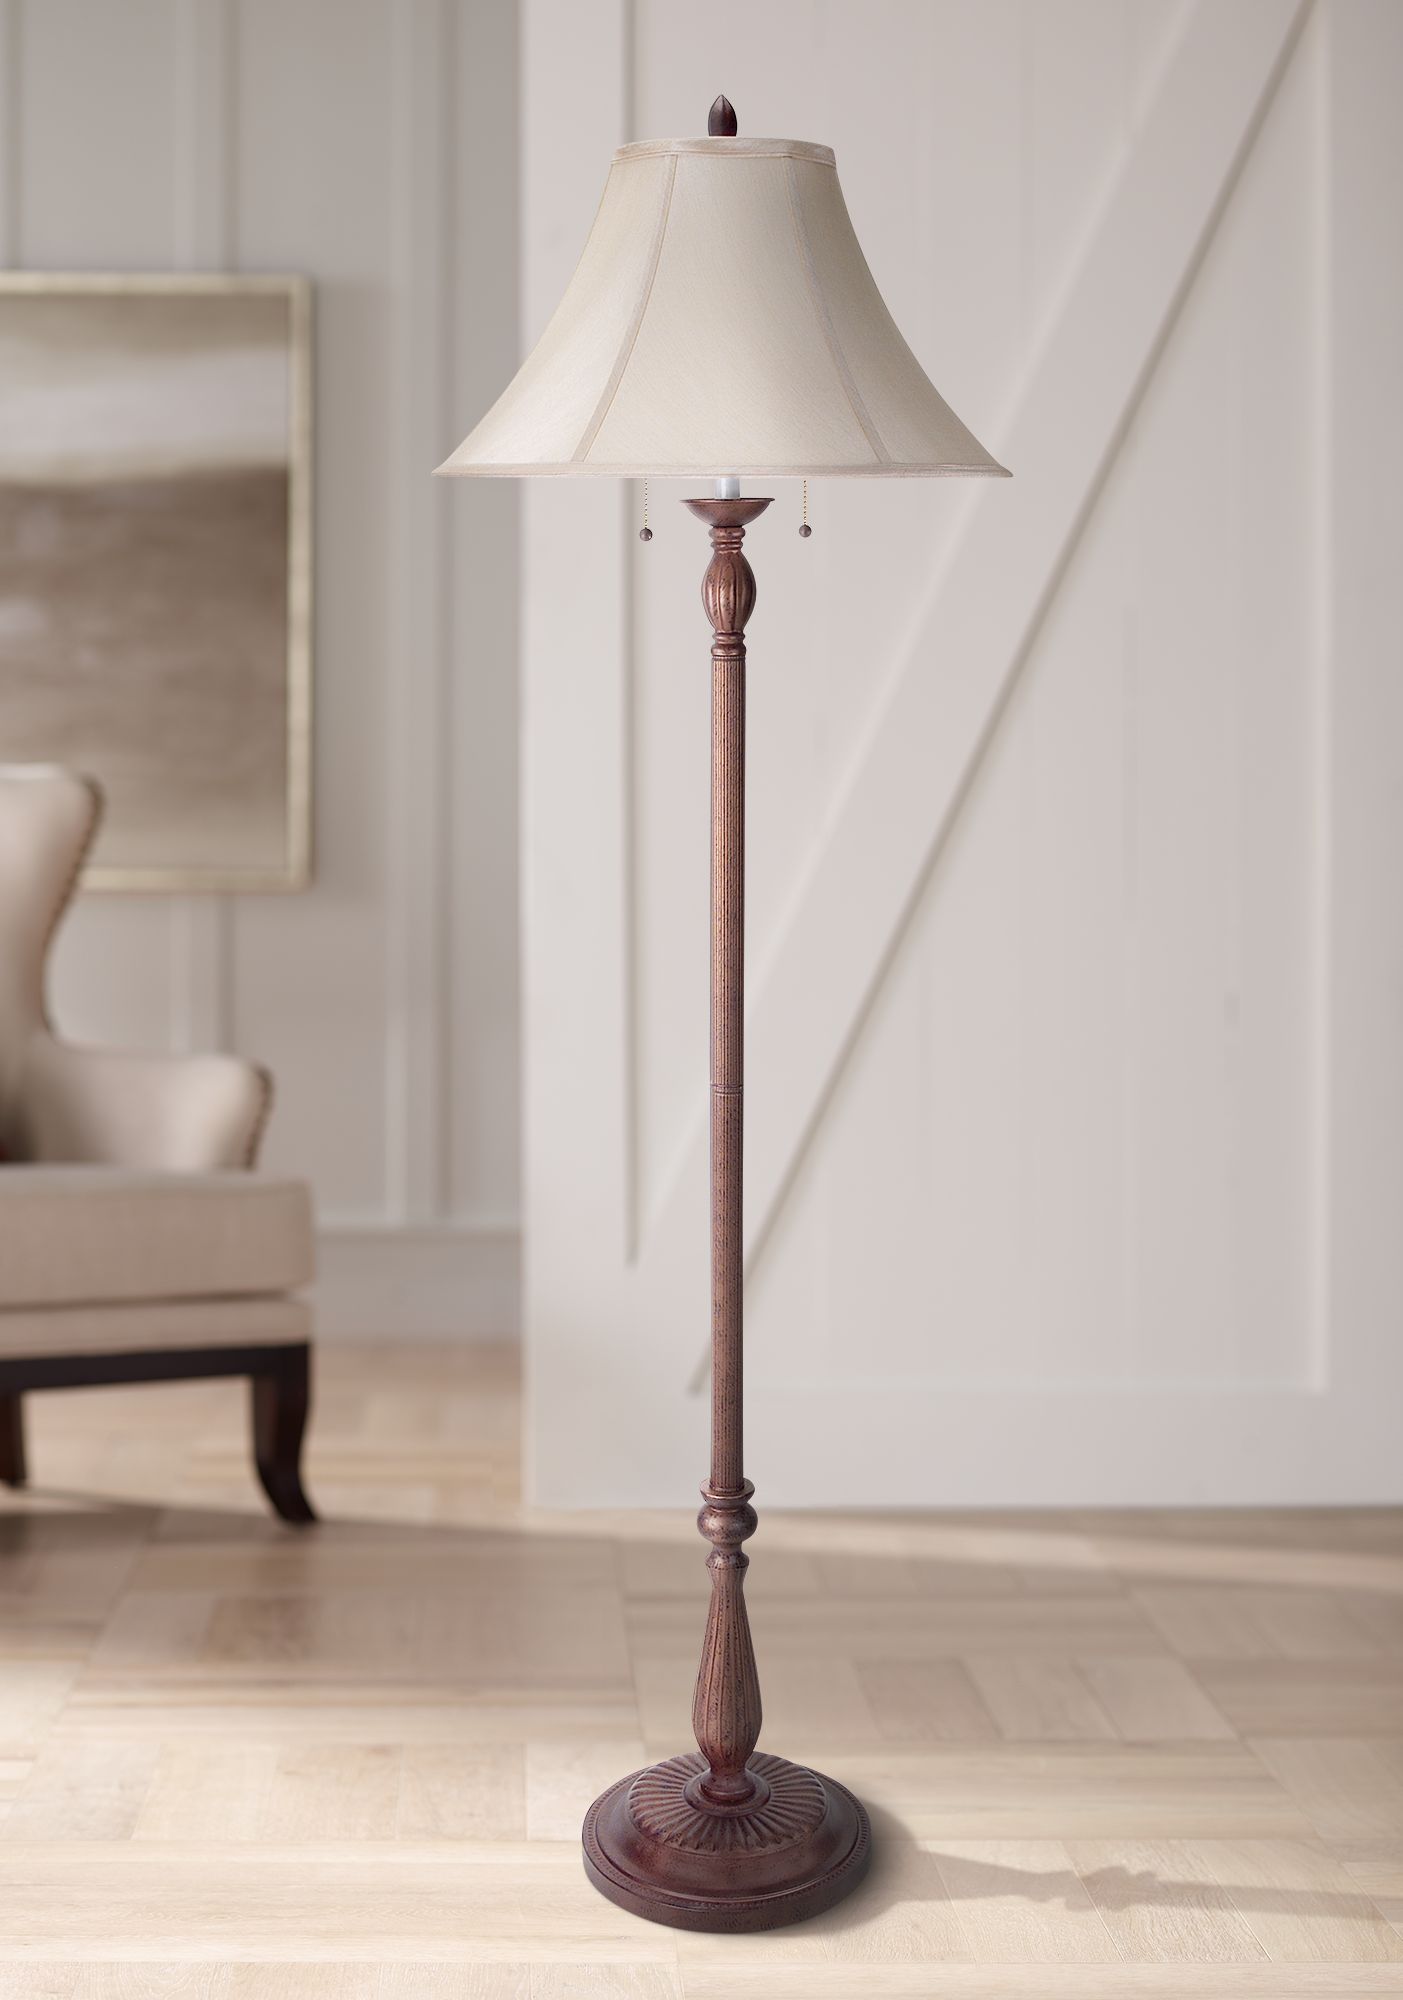 Silk Shade Double Pull Traditional Floor Lamp